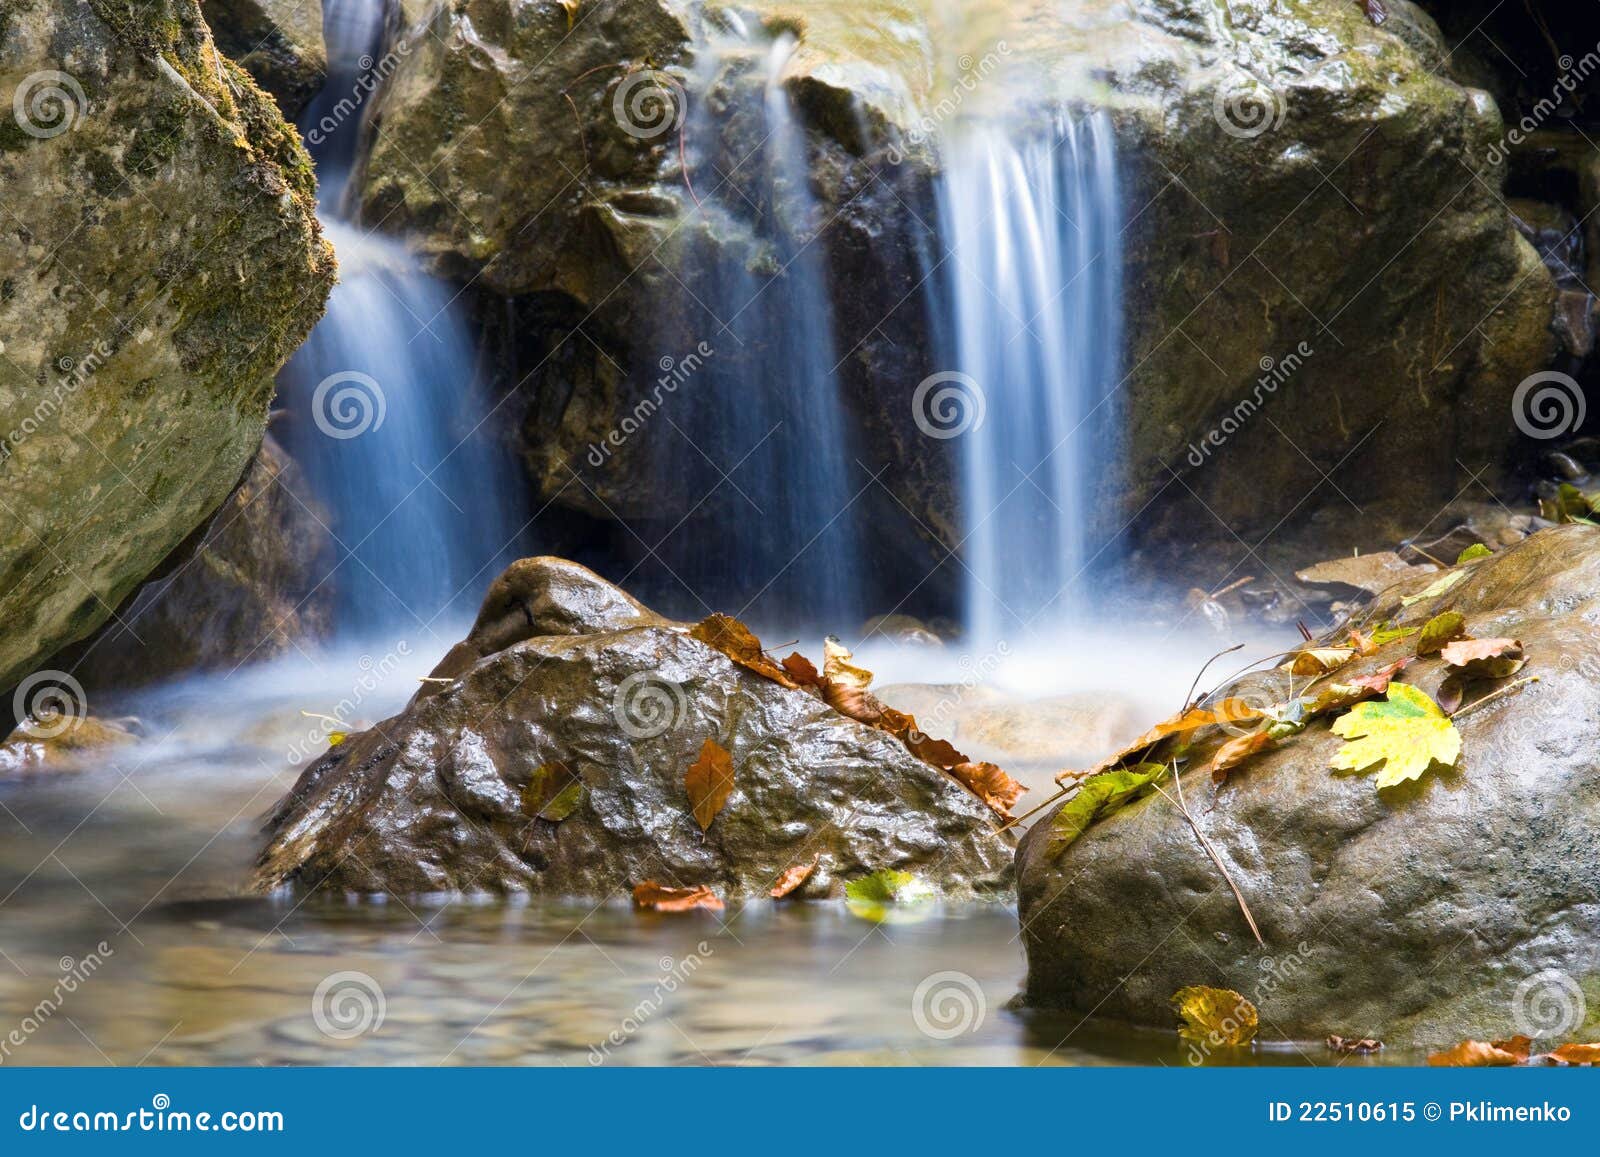 Nice blue water of stream in autumn forest